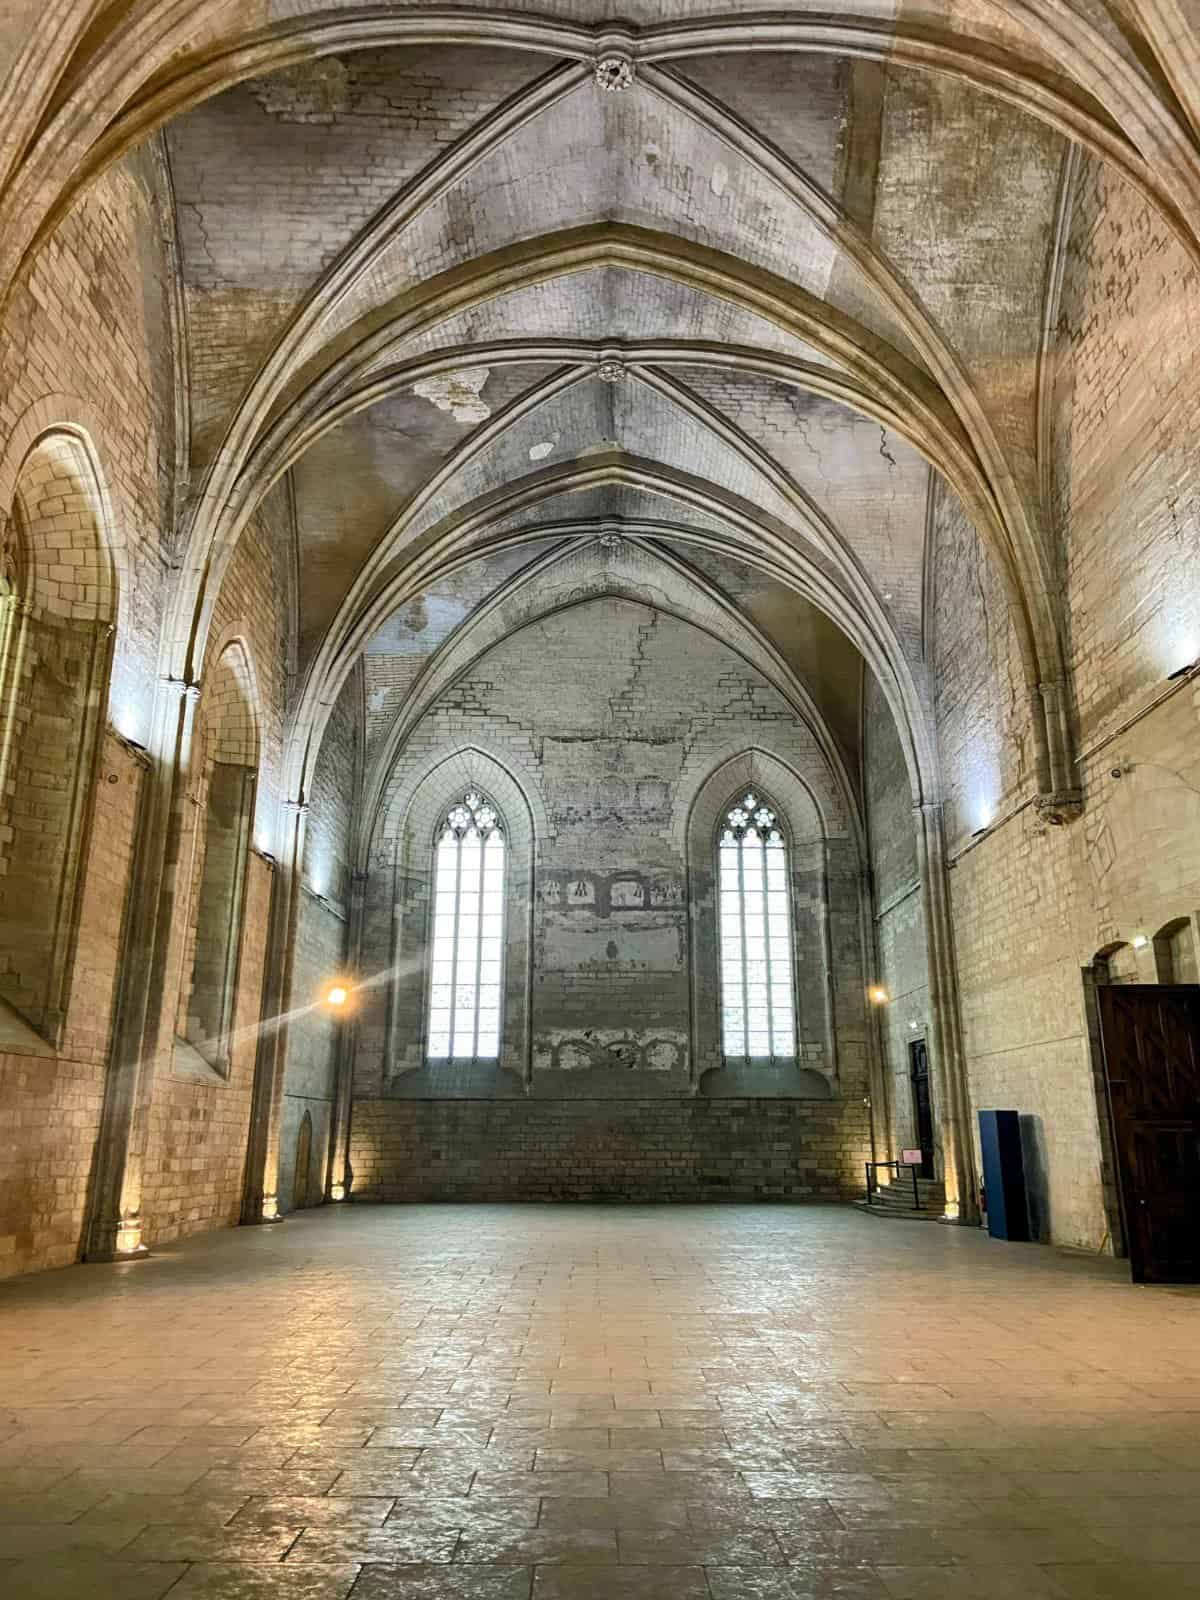 One of the large rooms inside the Palais des Papes with an arched ceiling